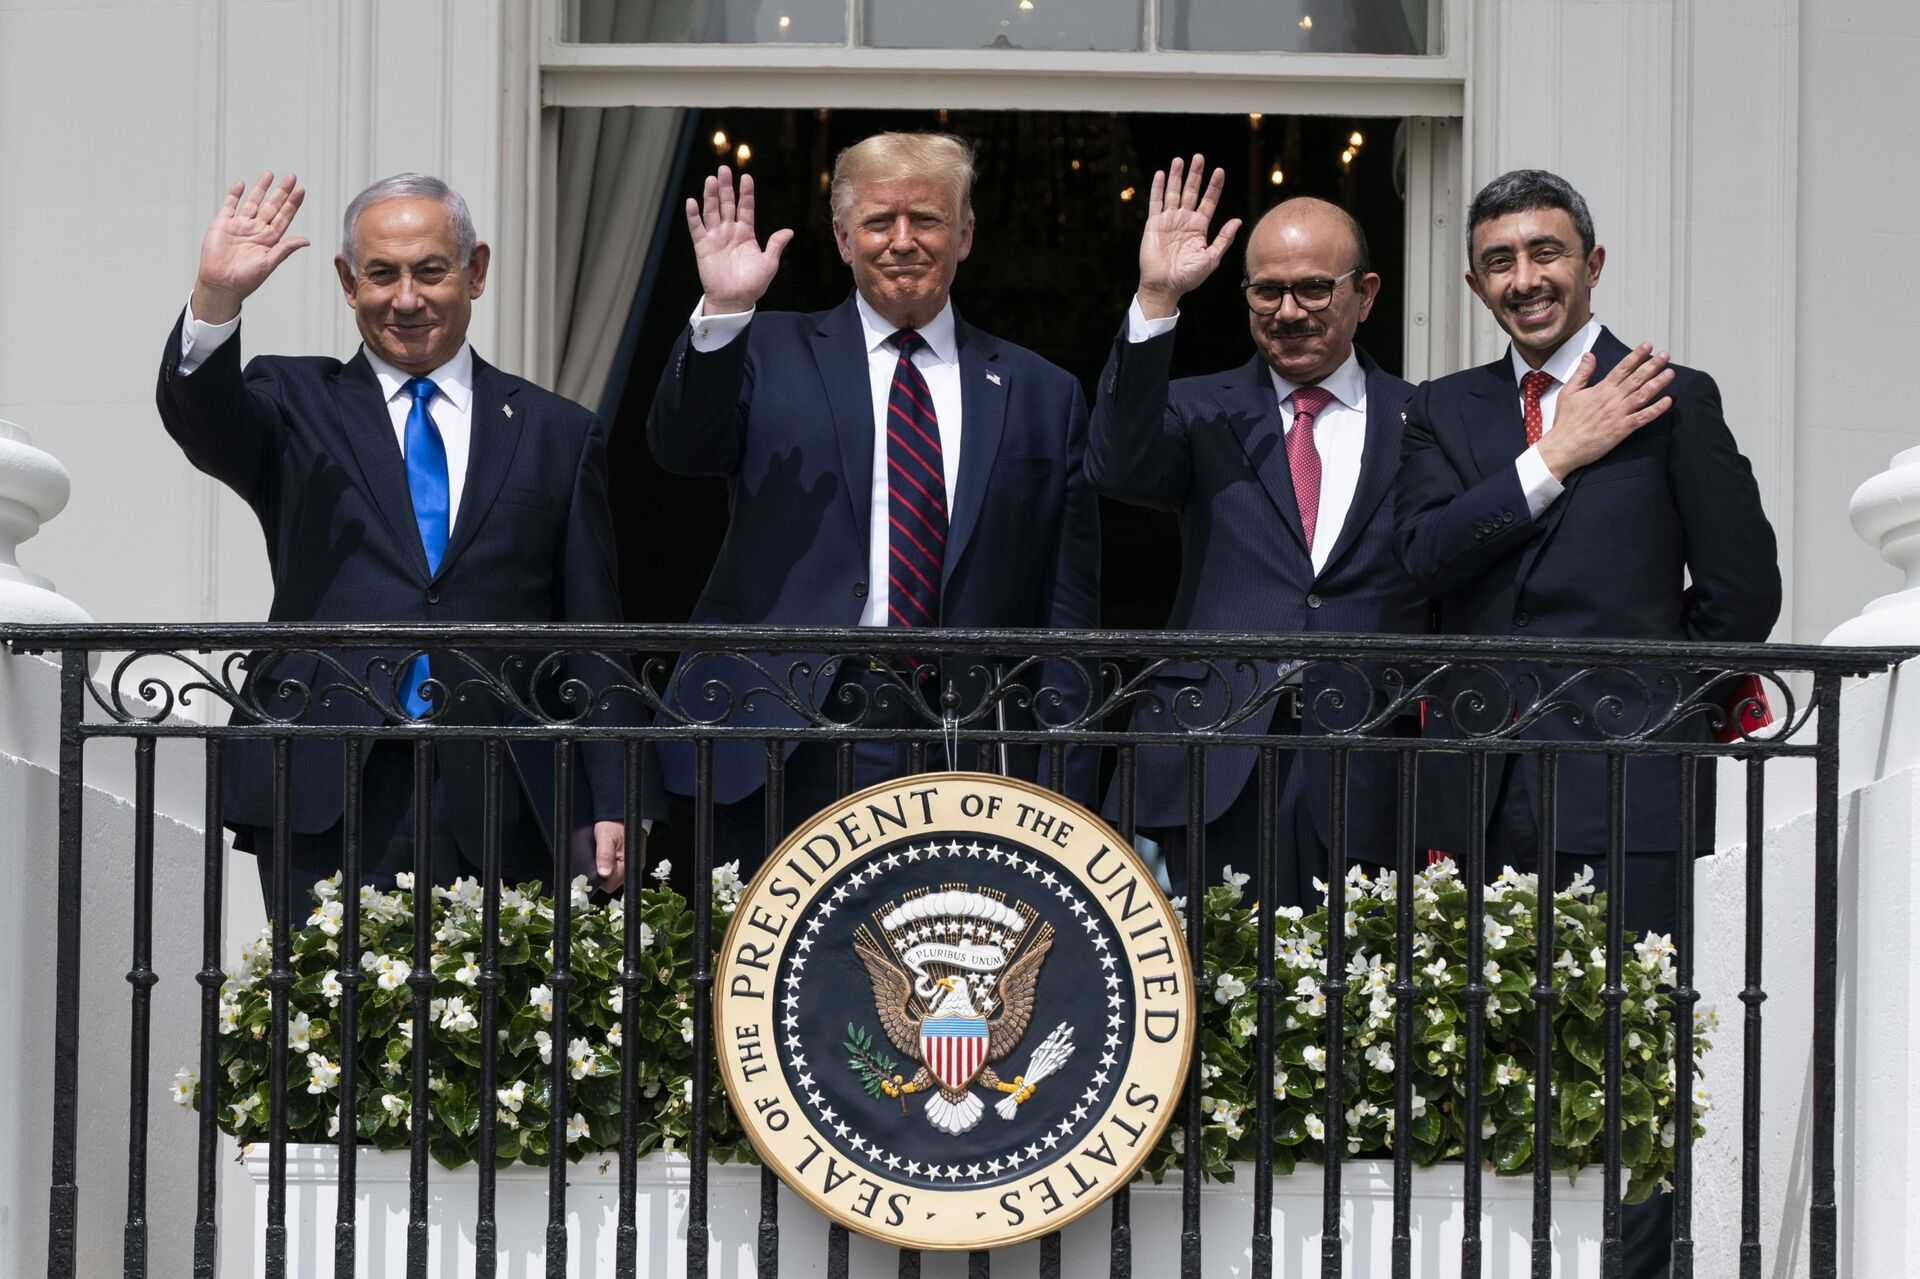 In this Tuesday, Sept. 15, 2020 file photo, Israeli Prime Minister Benjamin Netanyahu, left, U.S. President Donald Trump, Bahrain Foreign Minister Khalid bin Ahmed Al Khalifa and United Arab Emirates Foreign Minister Abdullah bin Zayed al-Nahyan pose for a photo on the Blue Room Balcony after signing the Abraham Accords during a ceremony on the South Lawn of the White House in Washington. - Sputnik International, 1920, 07.10.2021